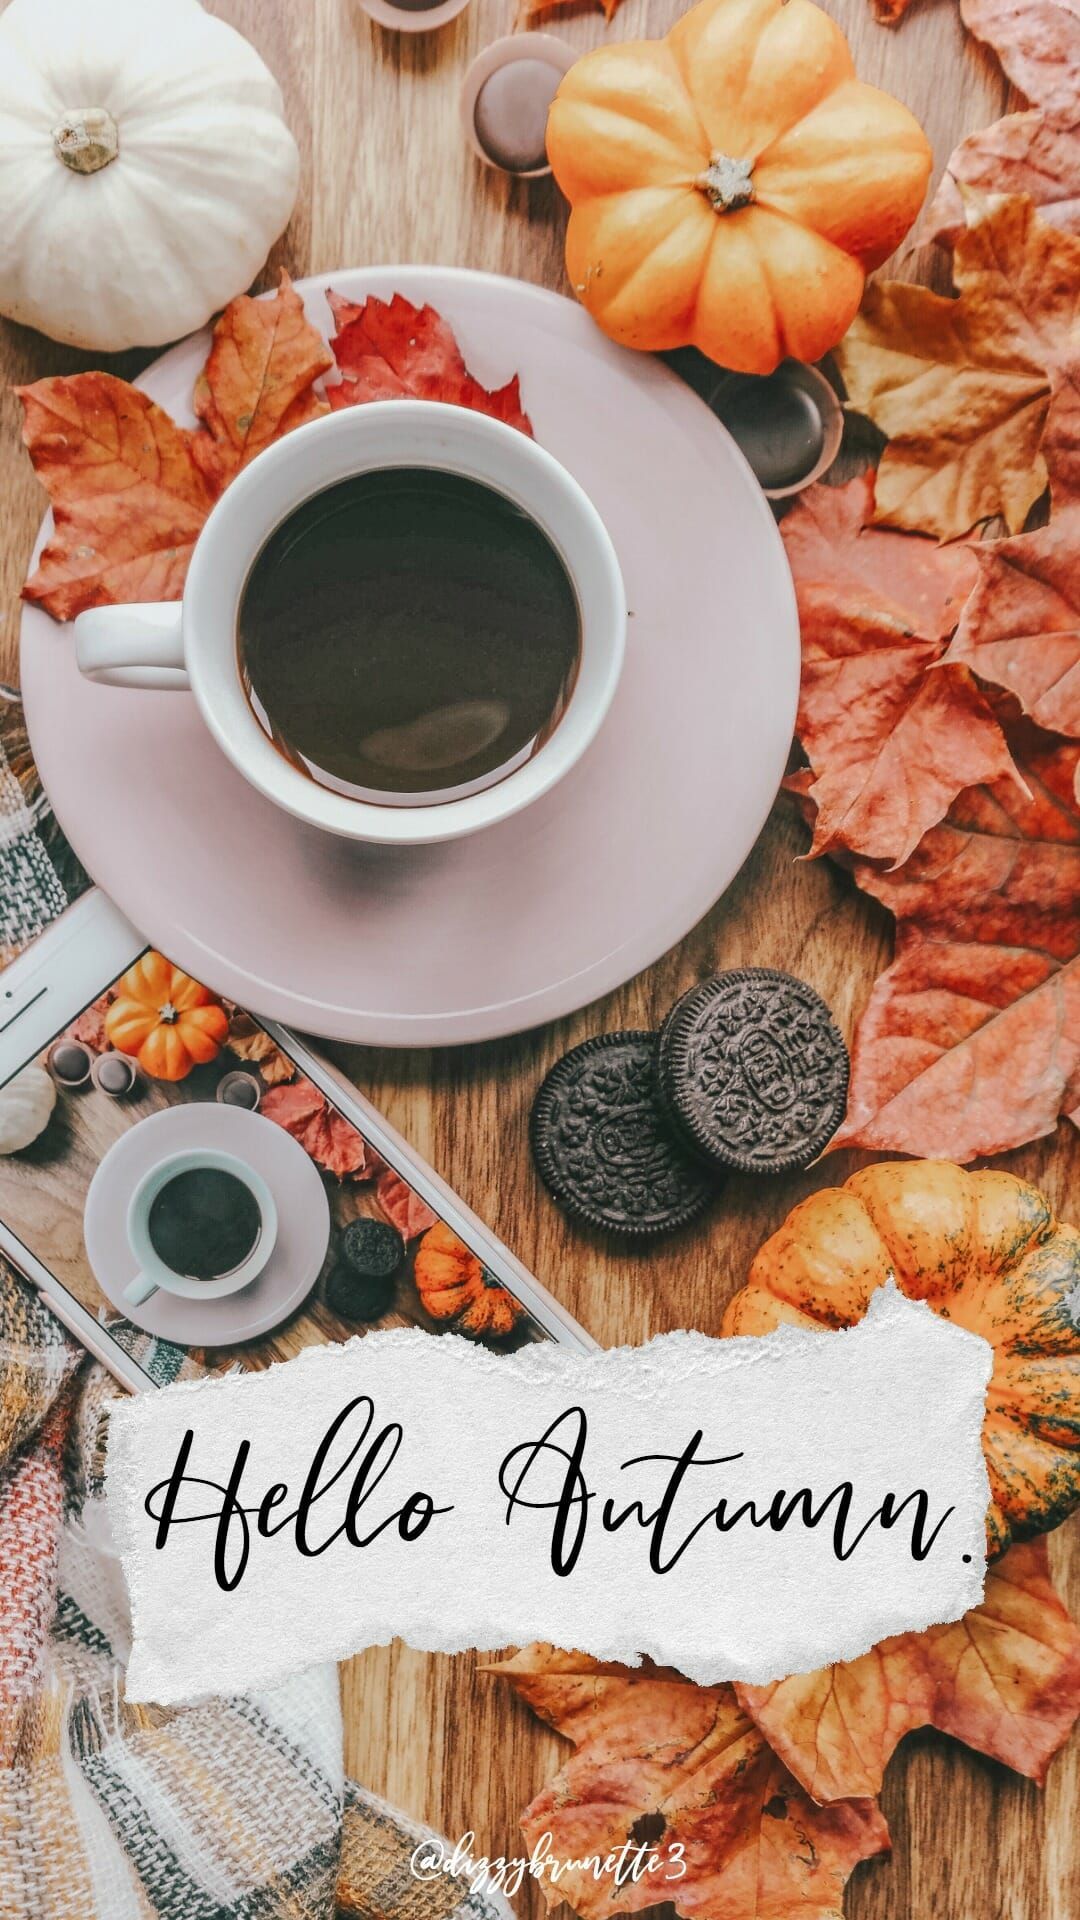 Free Amazing Fall Wallpaper Background For iPhone. Fall wallpaper, iPhone wallpaper vintage, iPhone wallpaper fall